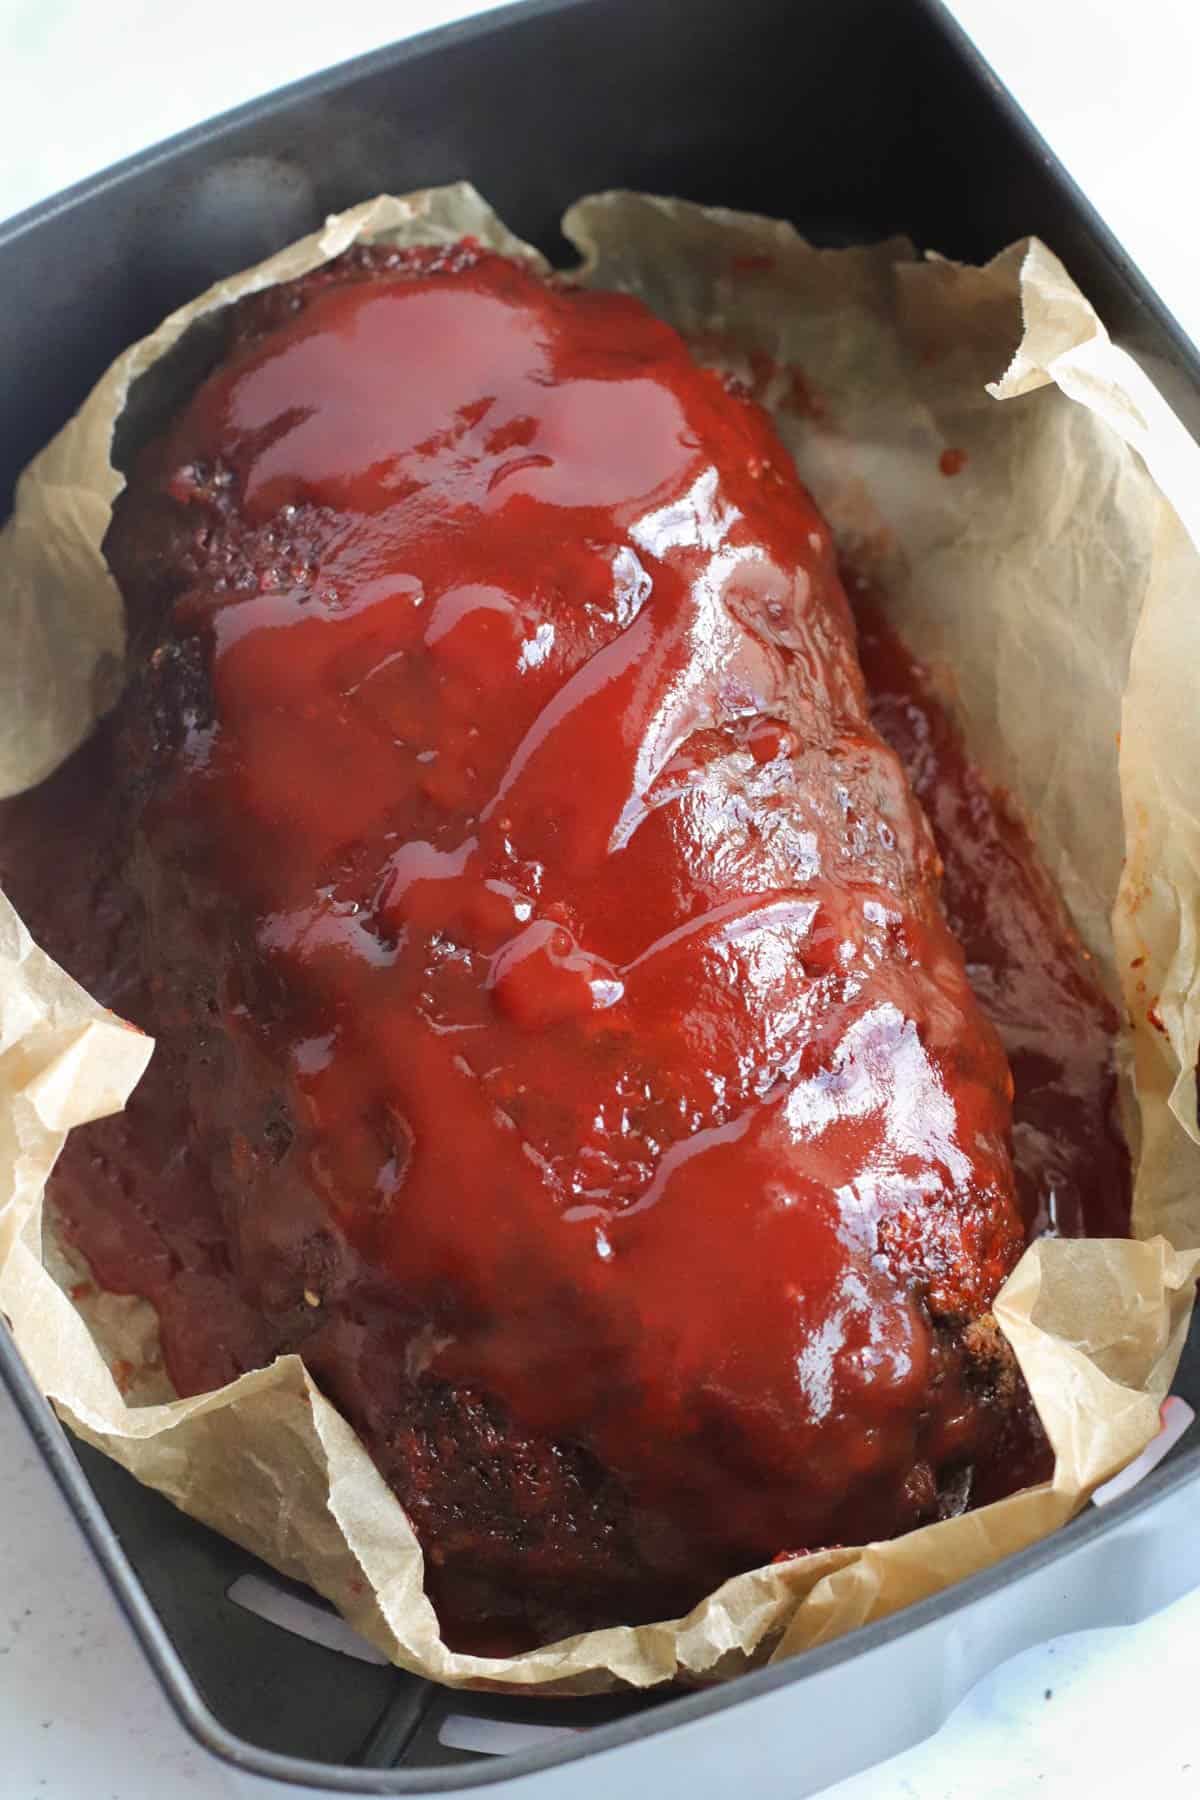 A meatloaf in an air fryer with ketchup glaze.